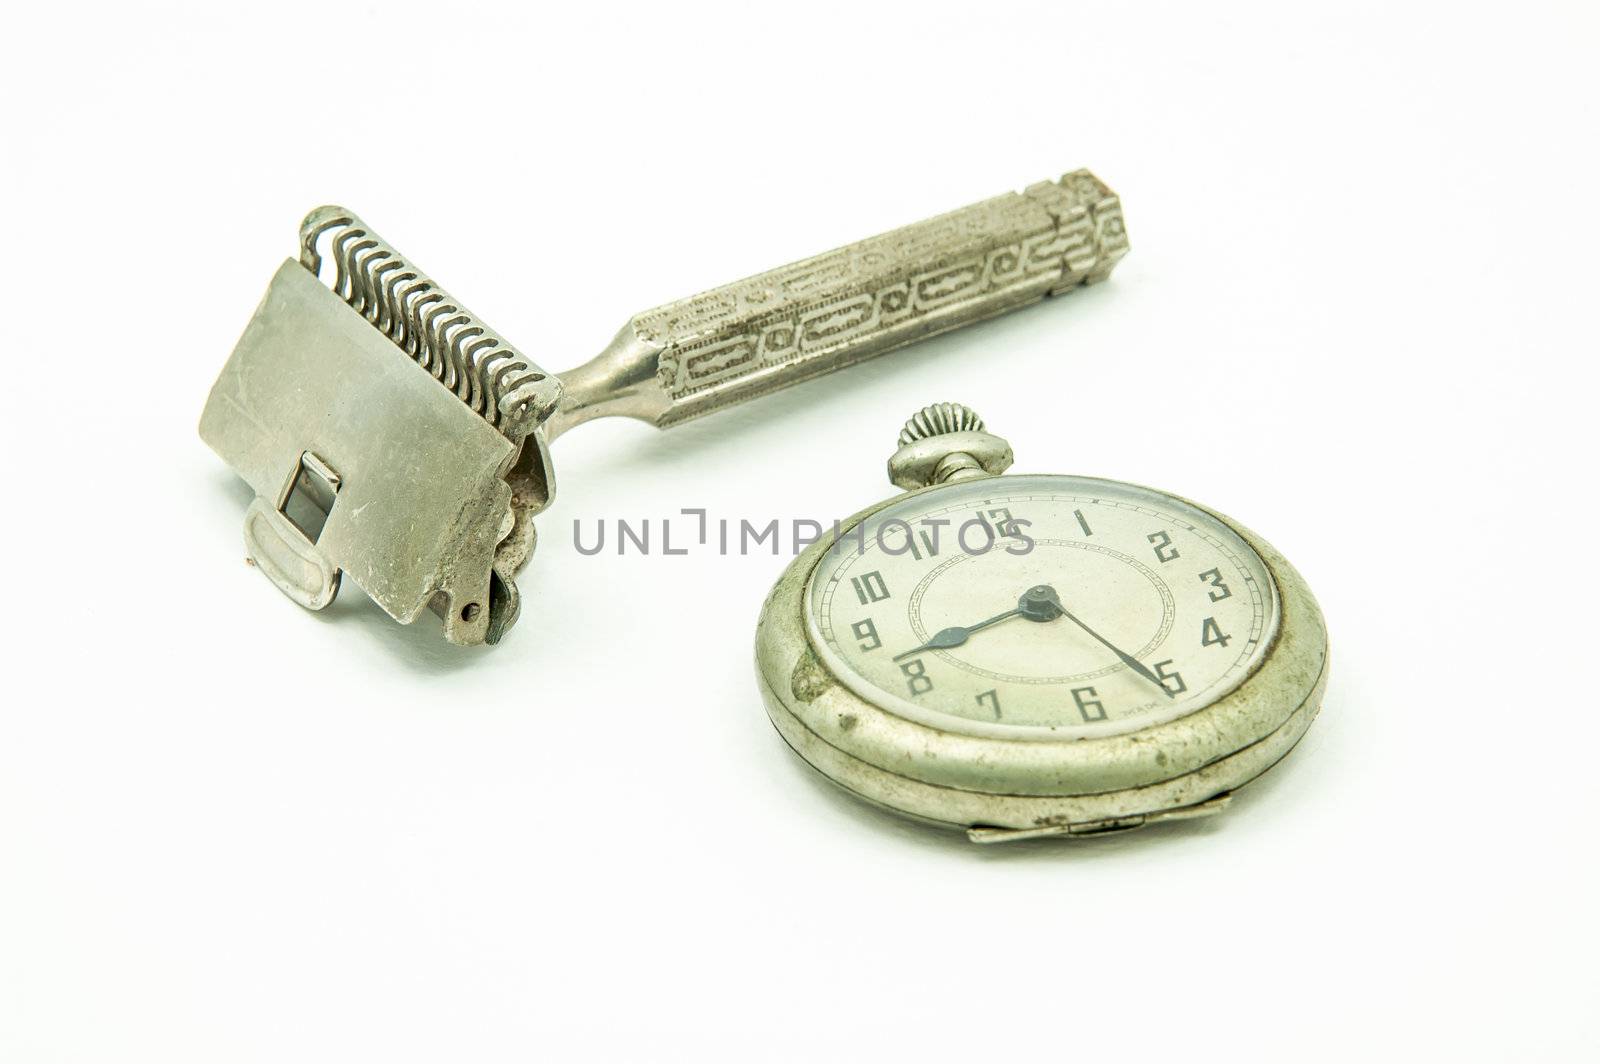 Old pocket watch and shaving device at the studio. Men accessories